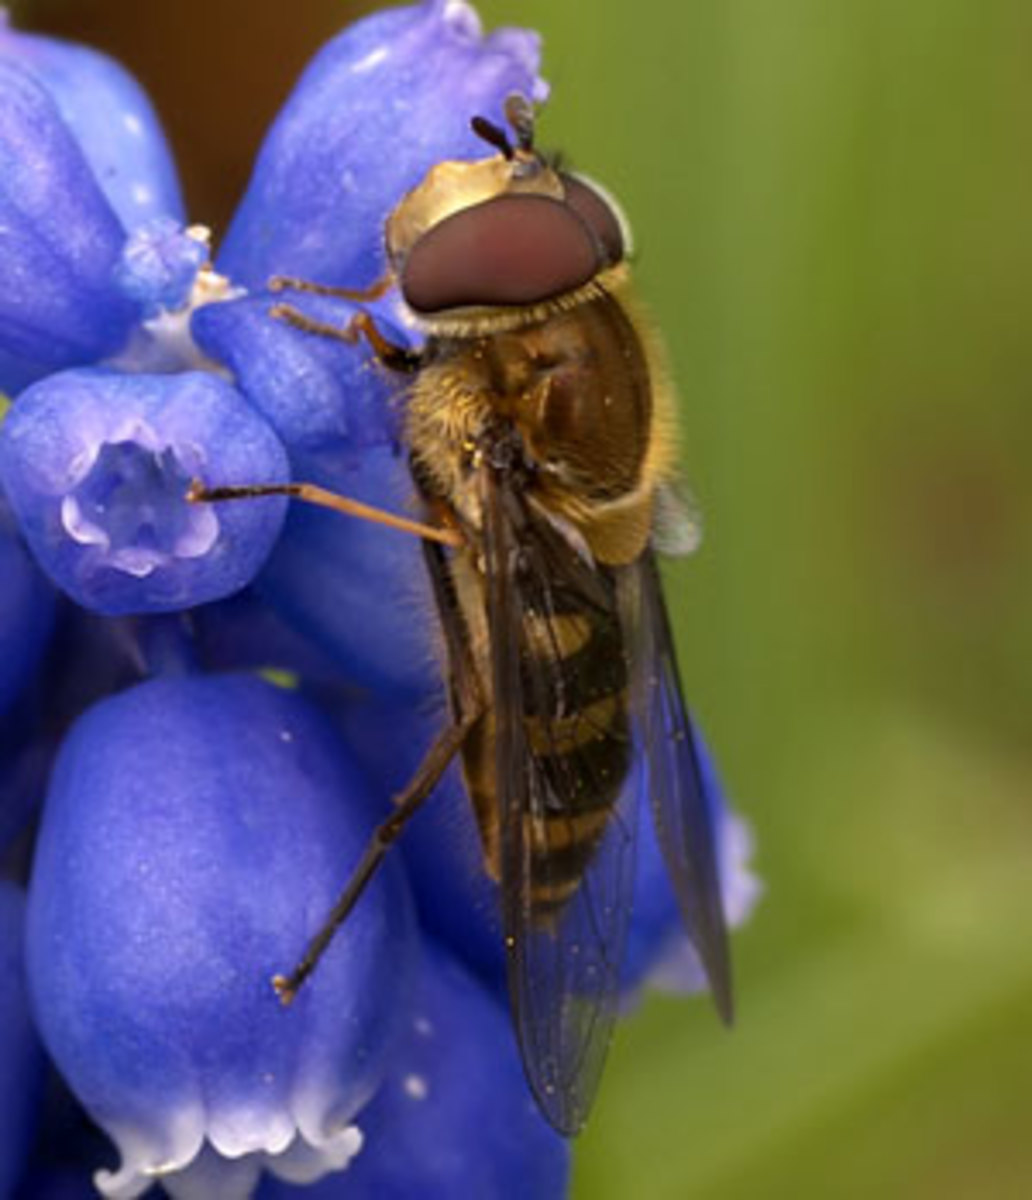 hover fly syrphid fly